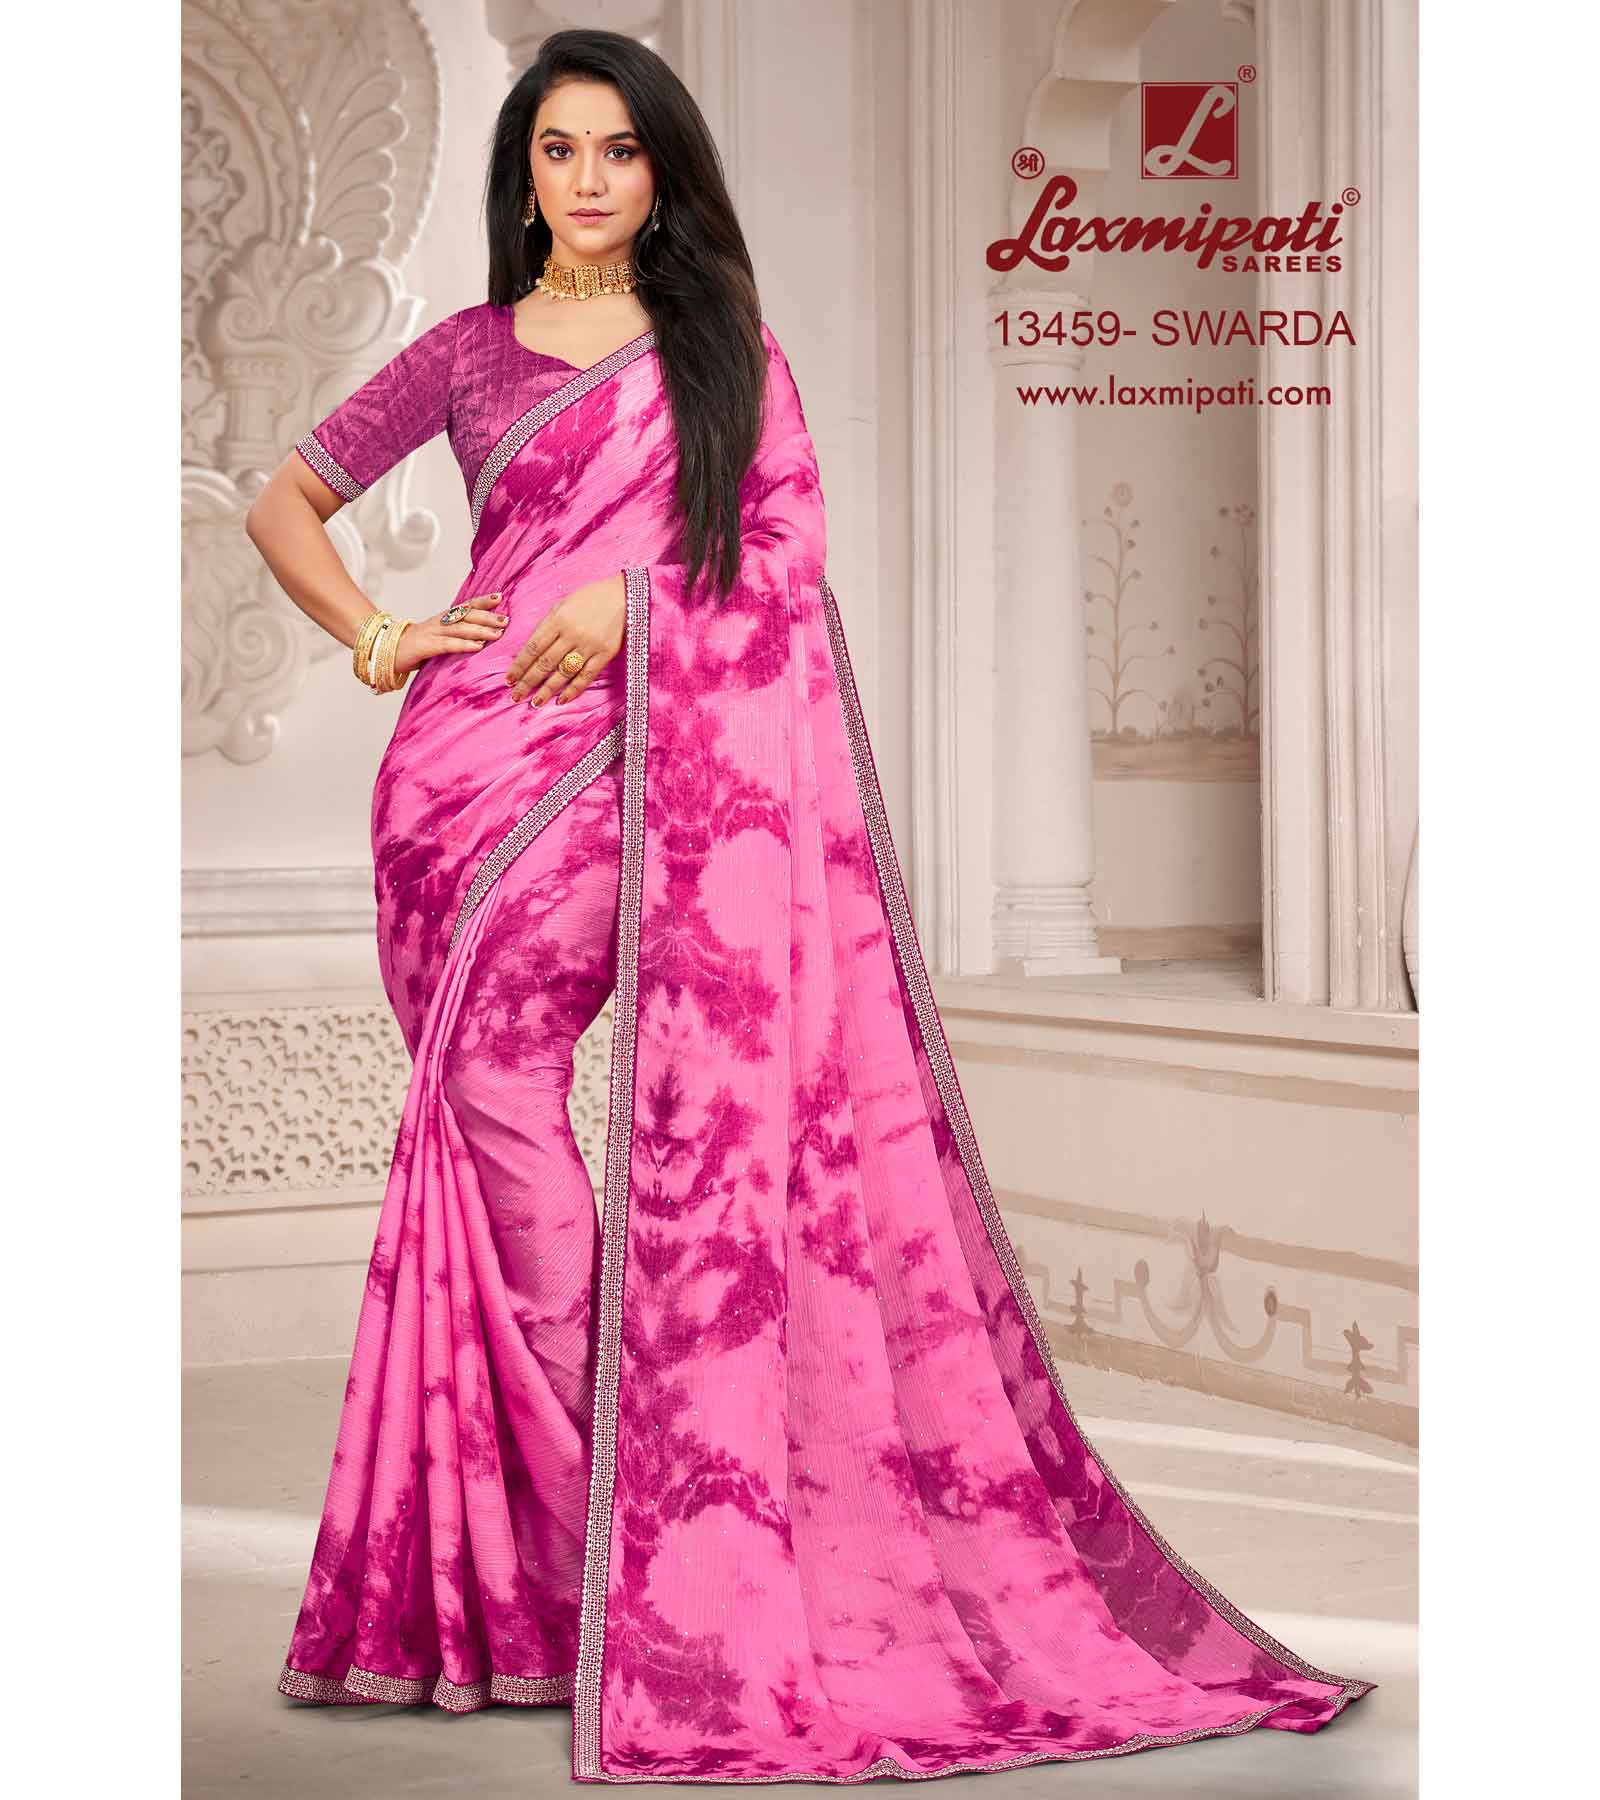 Buy Laxmipati Sarees Printed Daily Wear Georgette Pink Sarees Online @ Best  Price In India | Flipkart.com